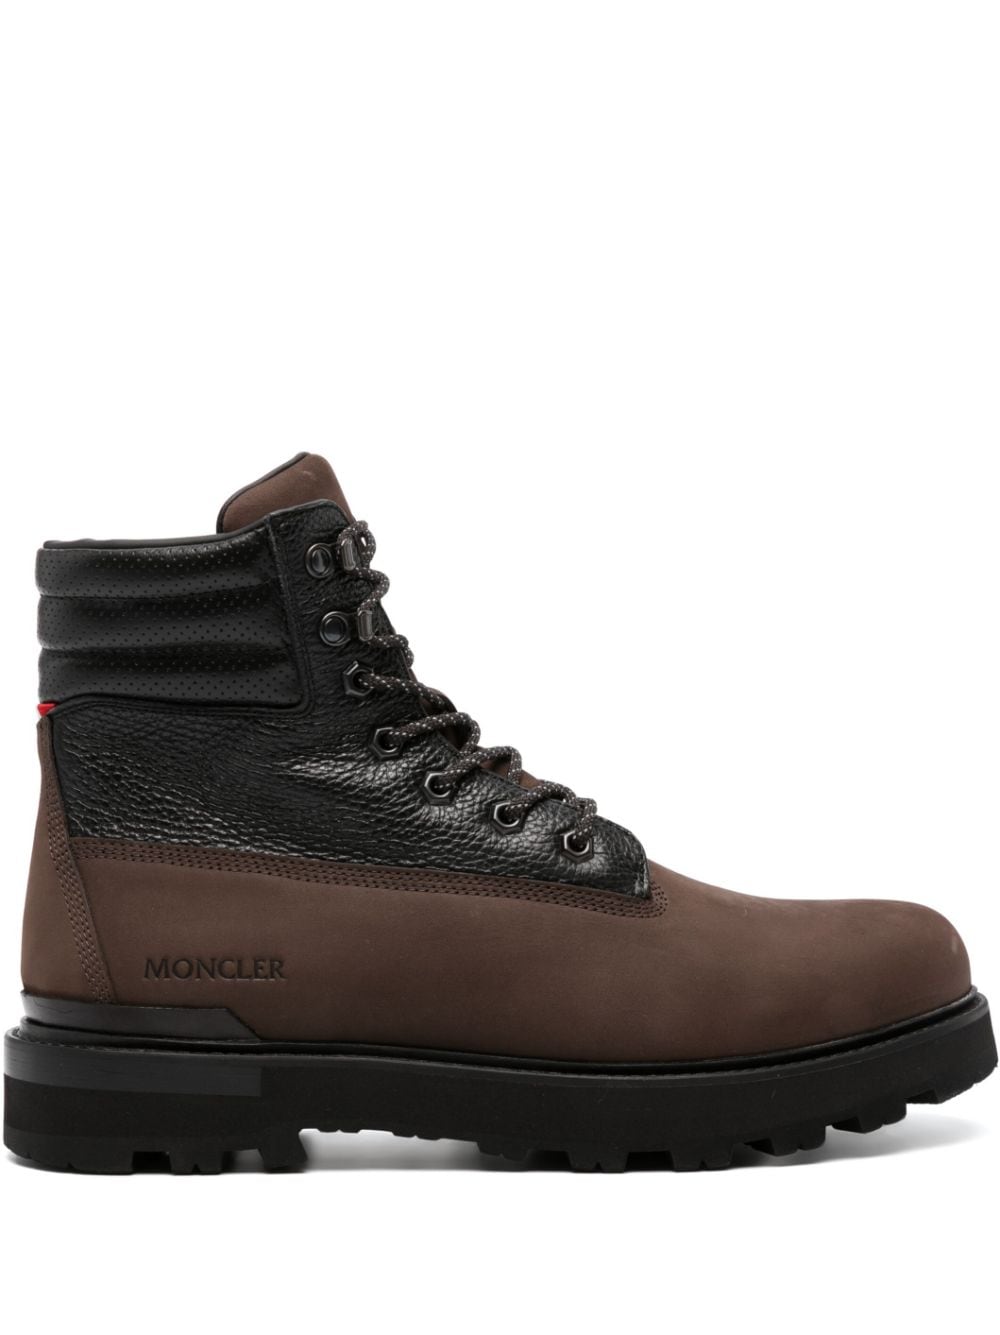 Moncler Peka leather ankle boots - Brown von Moncler